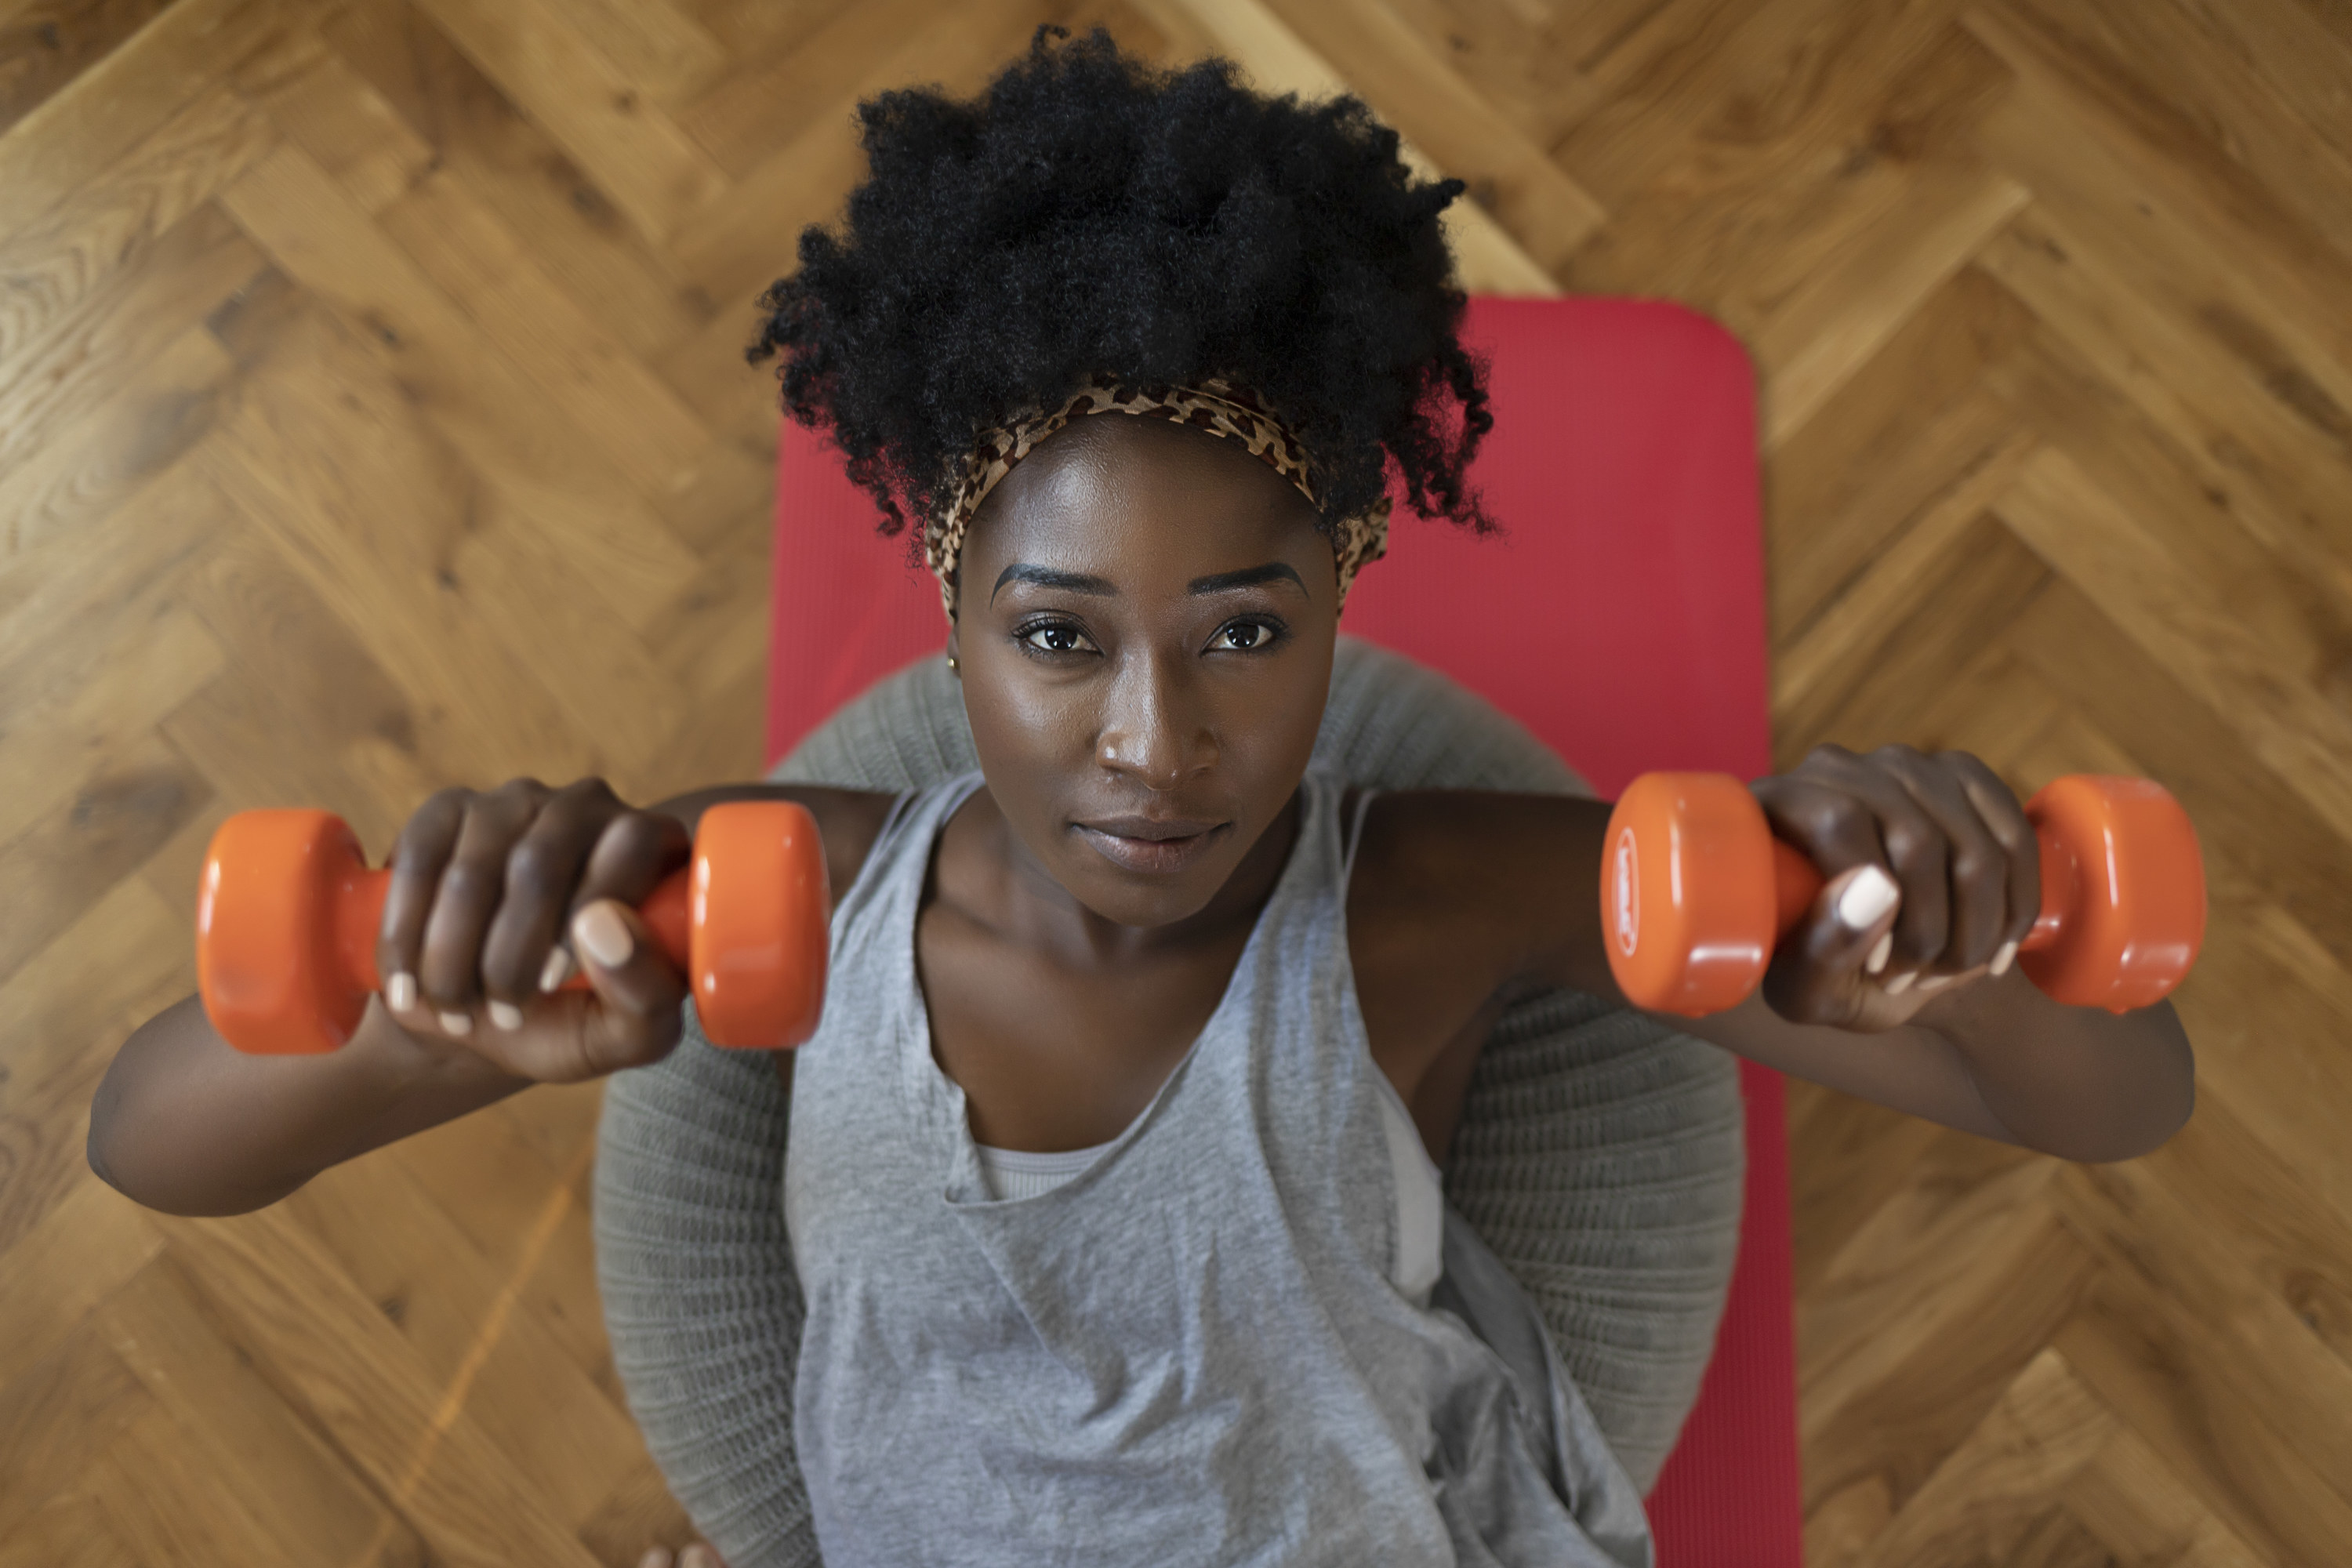 A woman lying on a yoga mat holding dumbbells in each hand